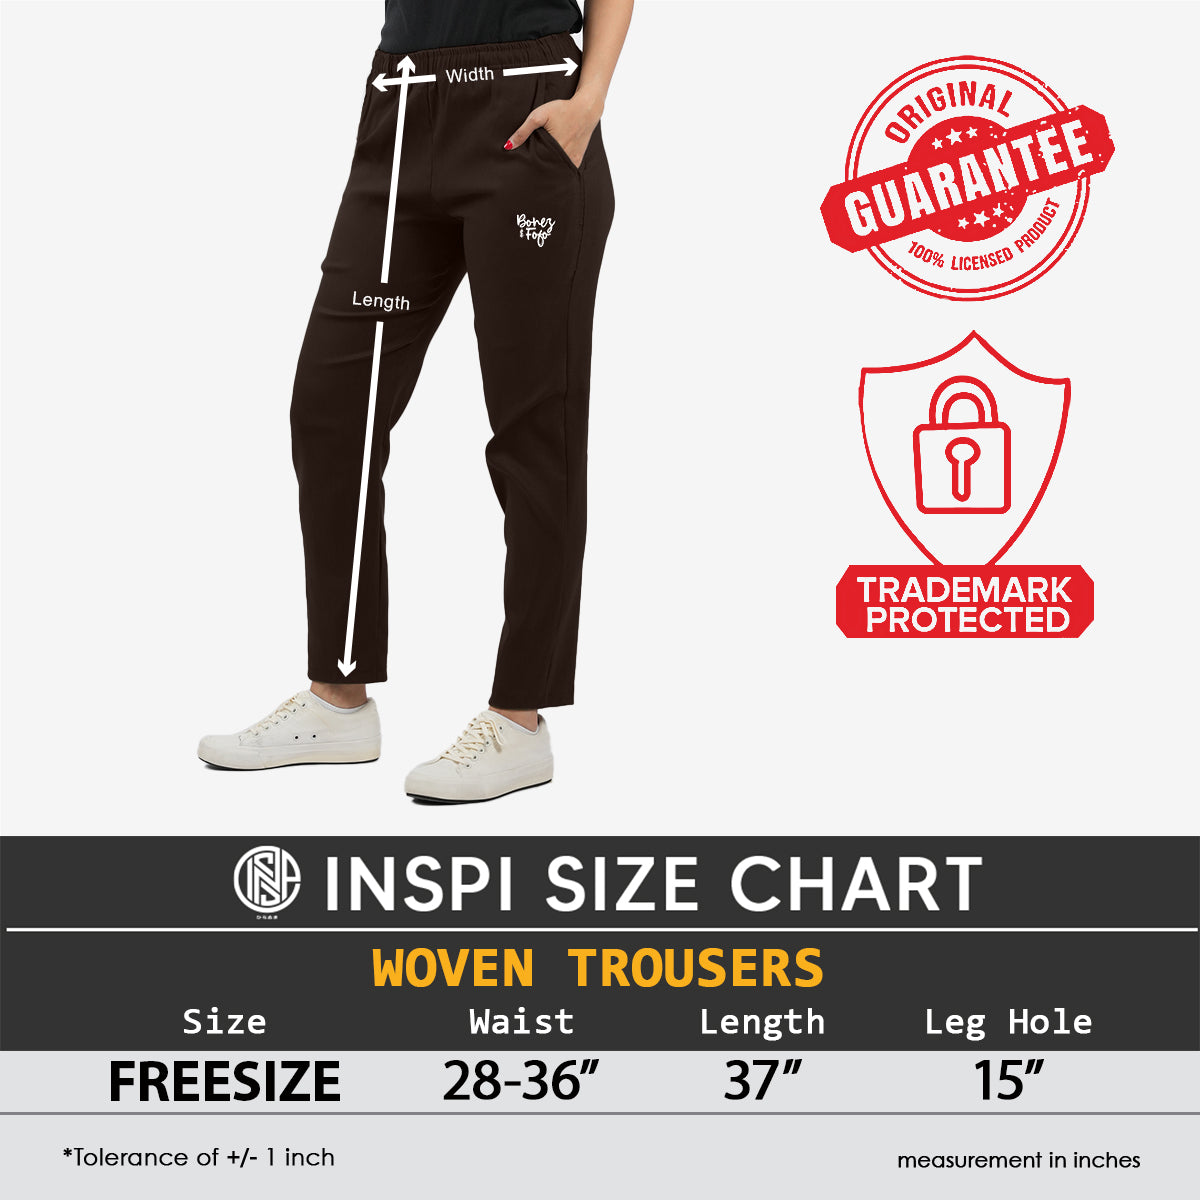 INSPI x Bonez & Fofo Trouser Pants for Men and Women with Side Pockets and Drawstring Collection High Waist Pant Pantalon